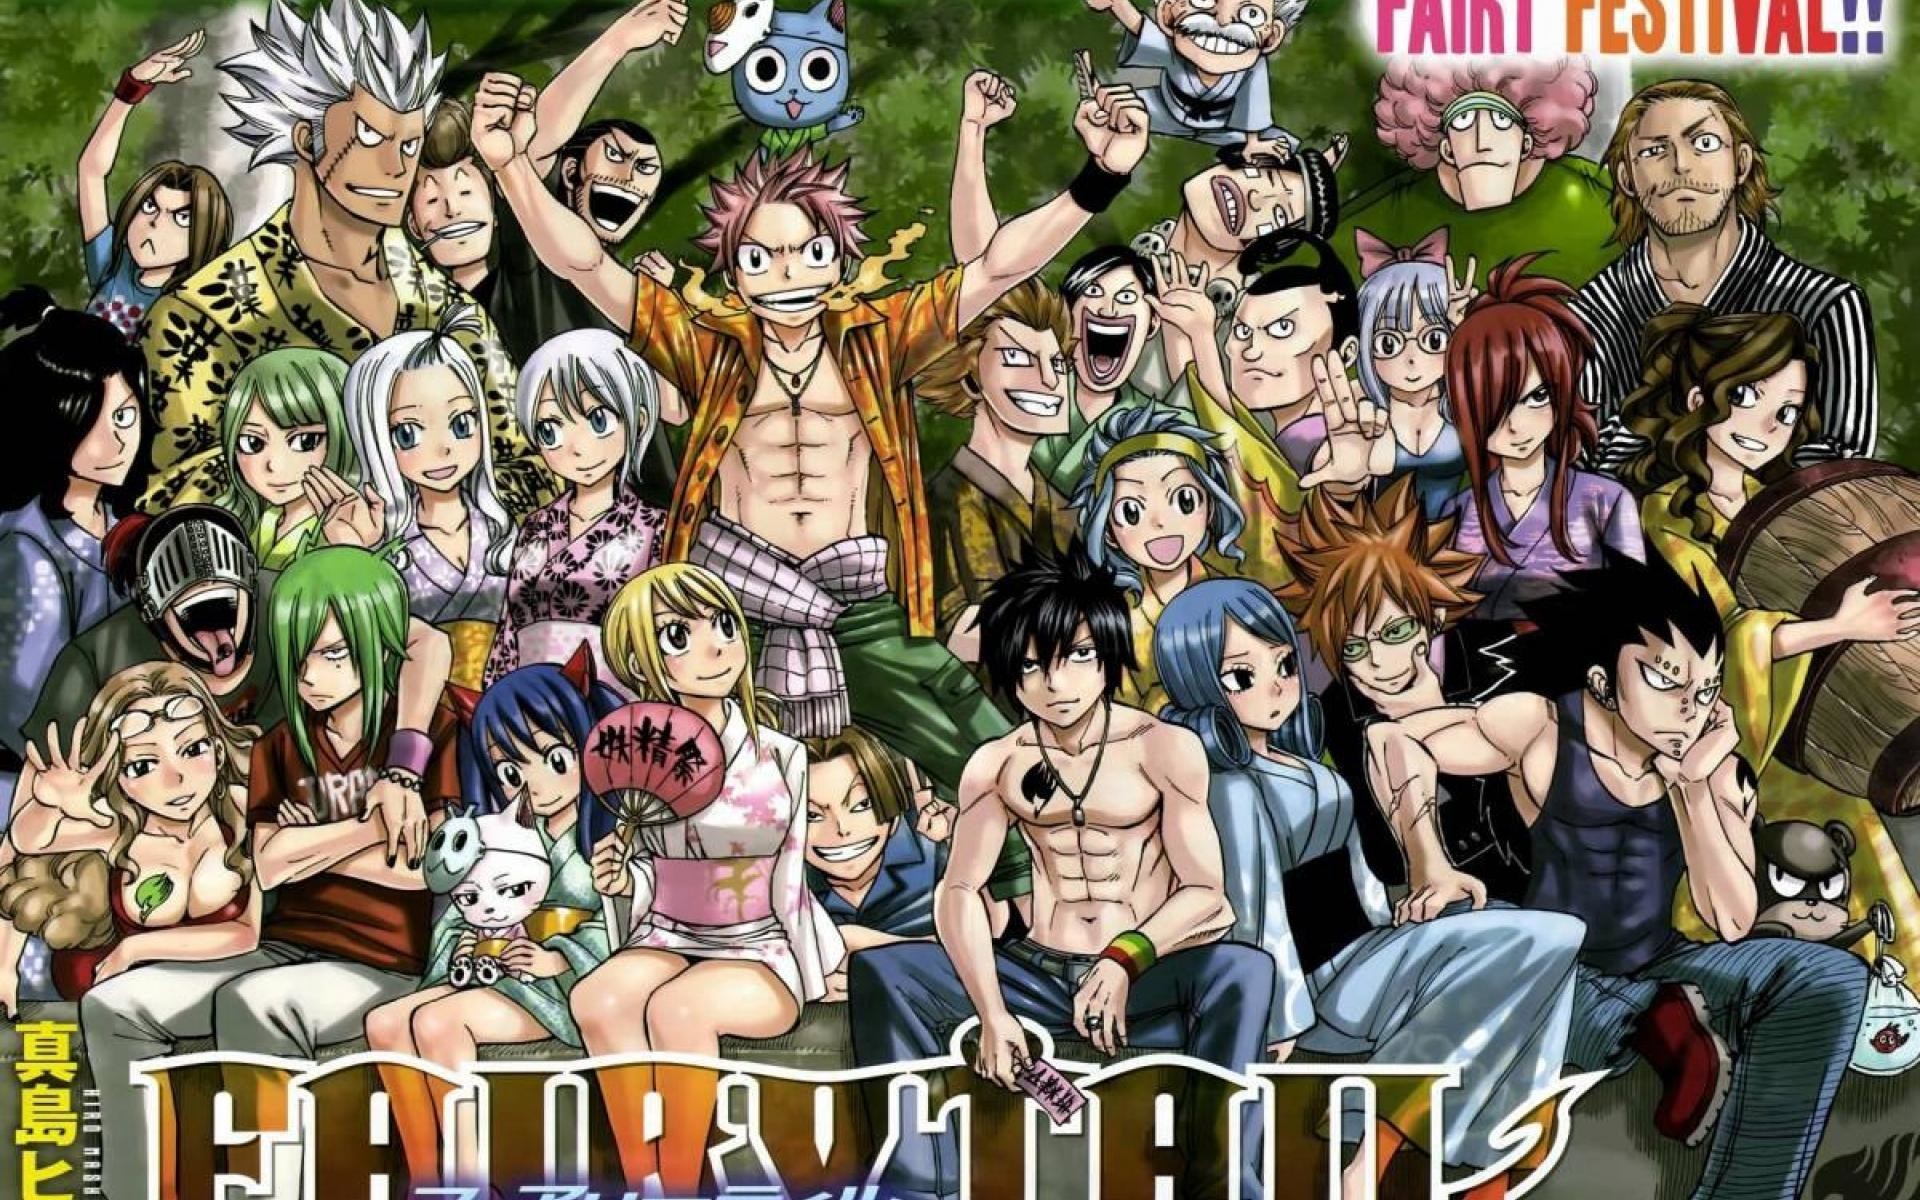 1920x1200 Fairy Tail Characters Wallpaper